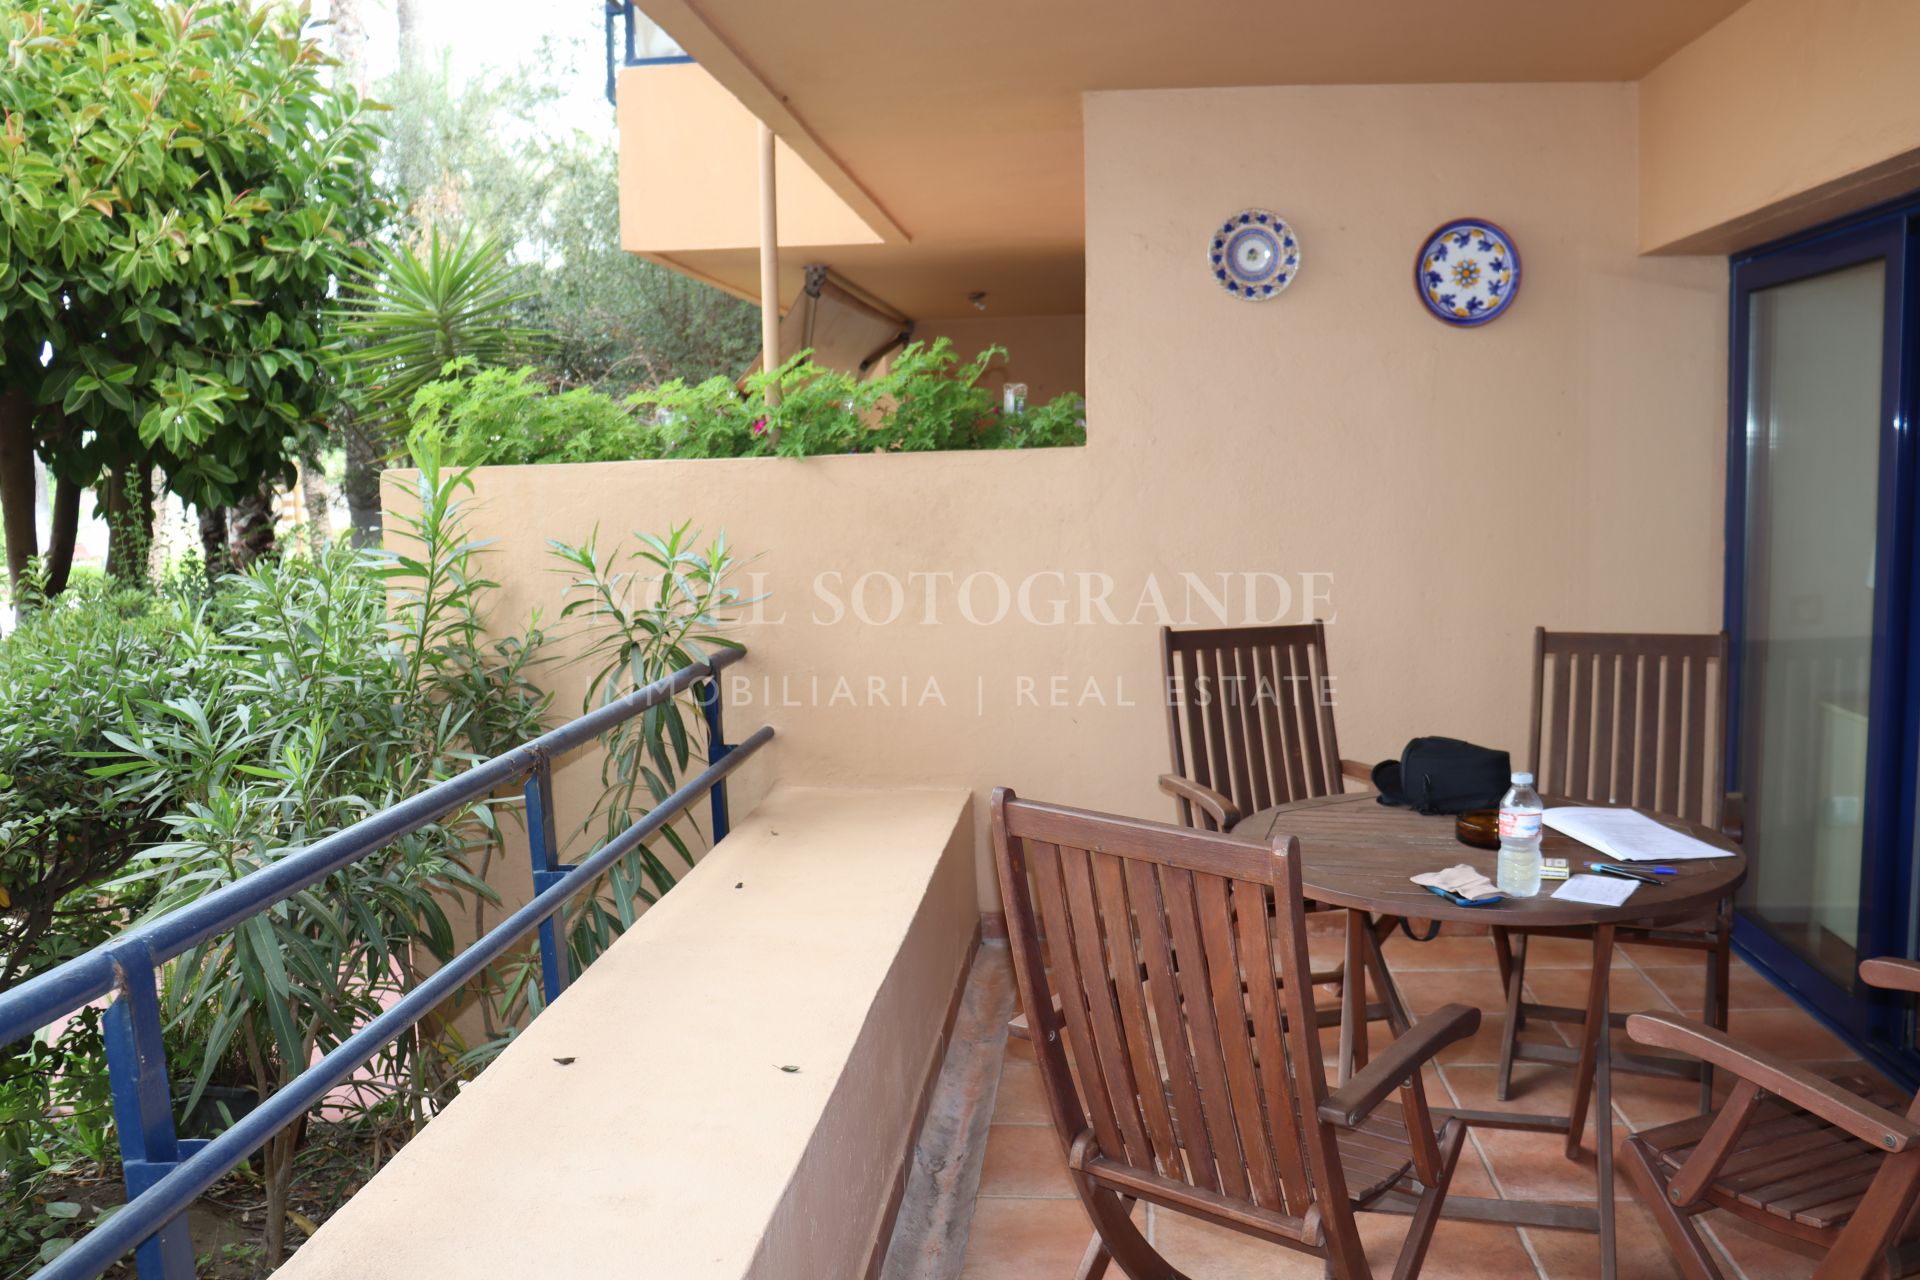 Ground Floor Apartment for short term rent by the Sotogrande beach